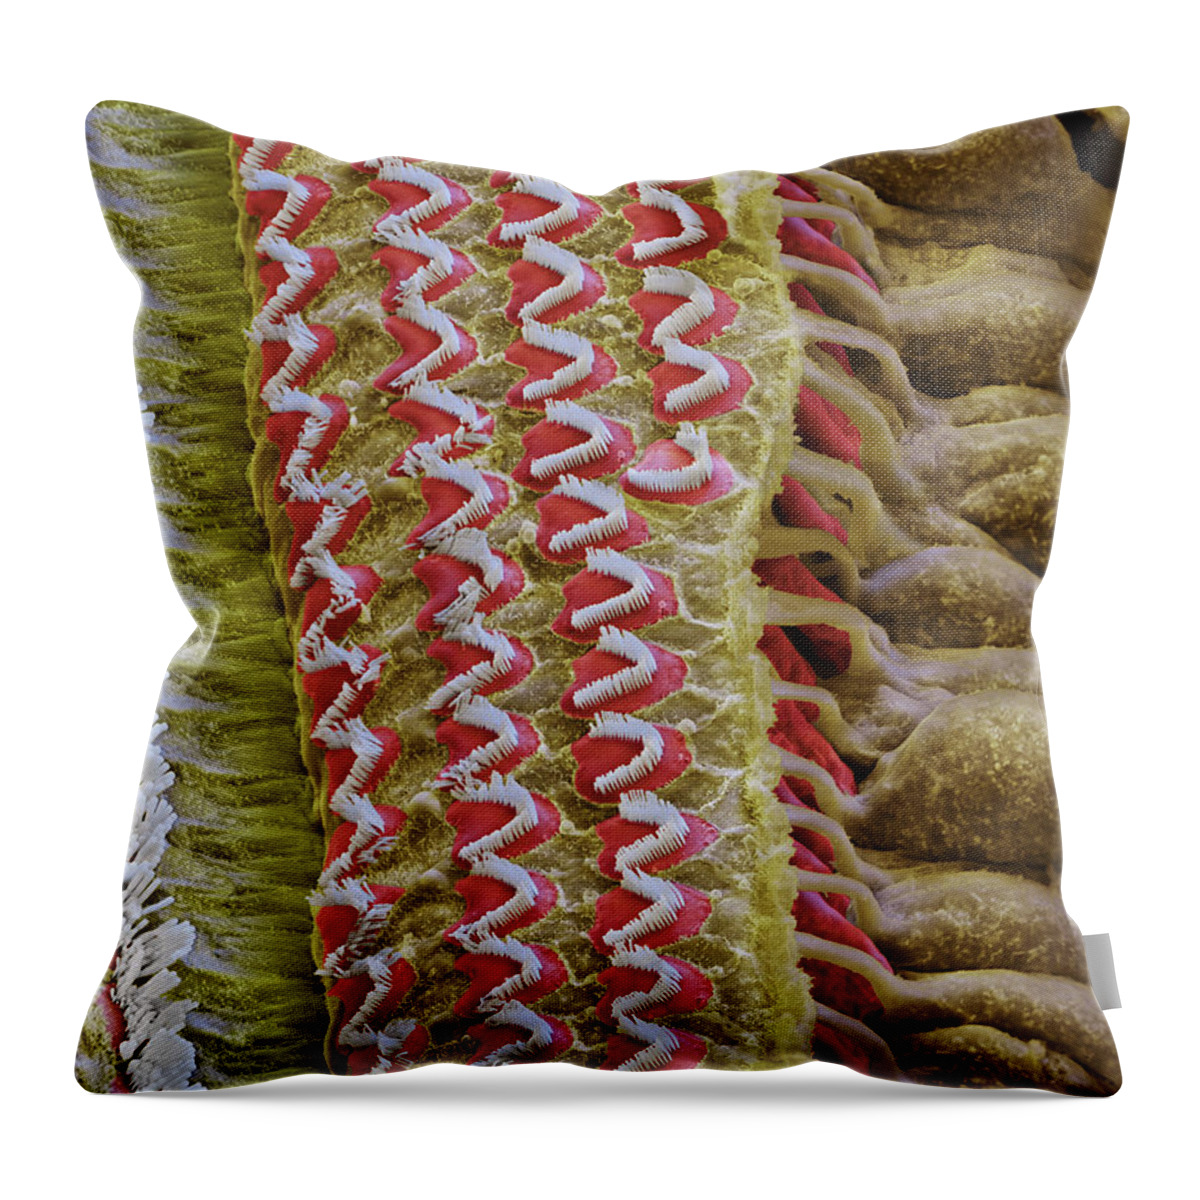 Cochlea Throw Pillow featuring the photograph Cochlea, Inner And Outer Hair Cells, Sem by Oliver Meckes EYE OF SCIENCE